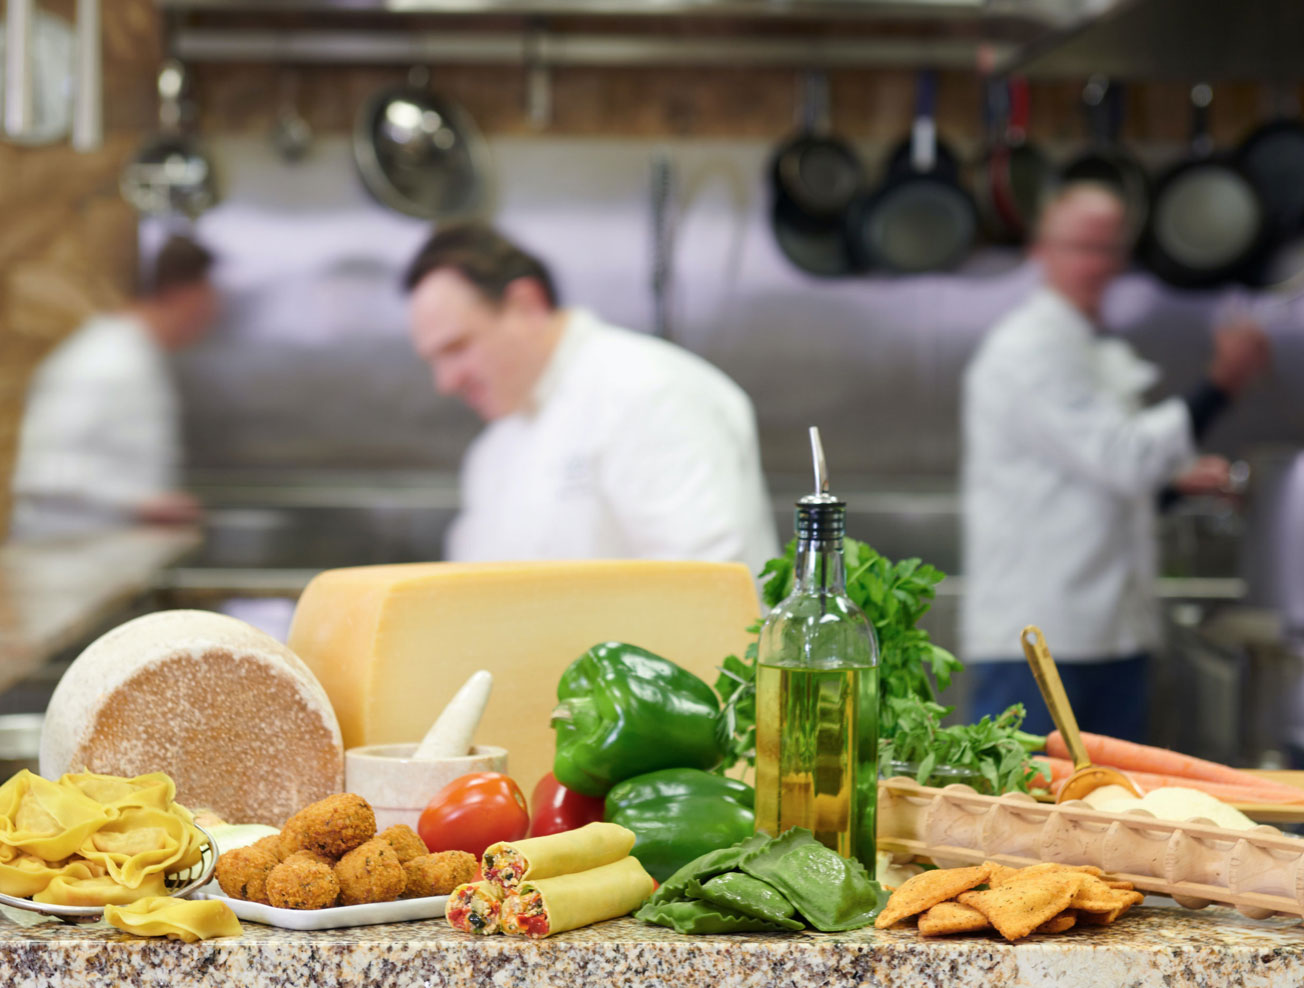 Ingredients displayed on a table with chefs cooking in the background